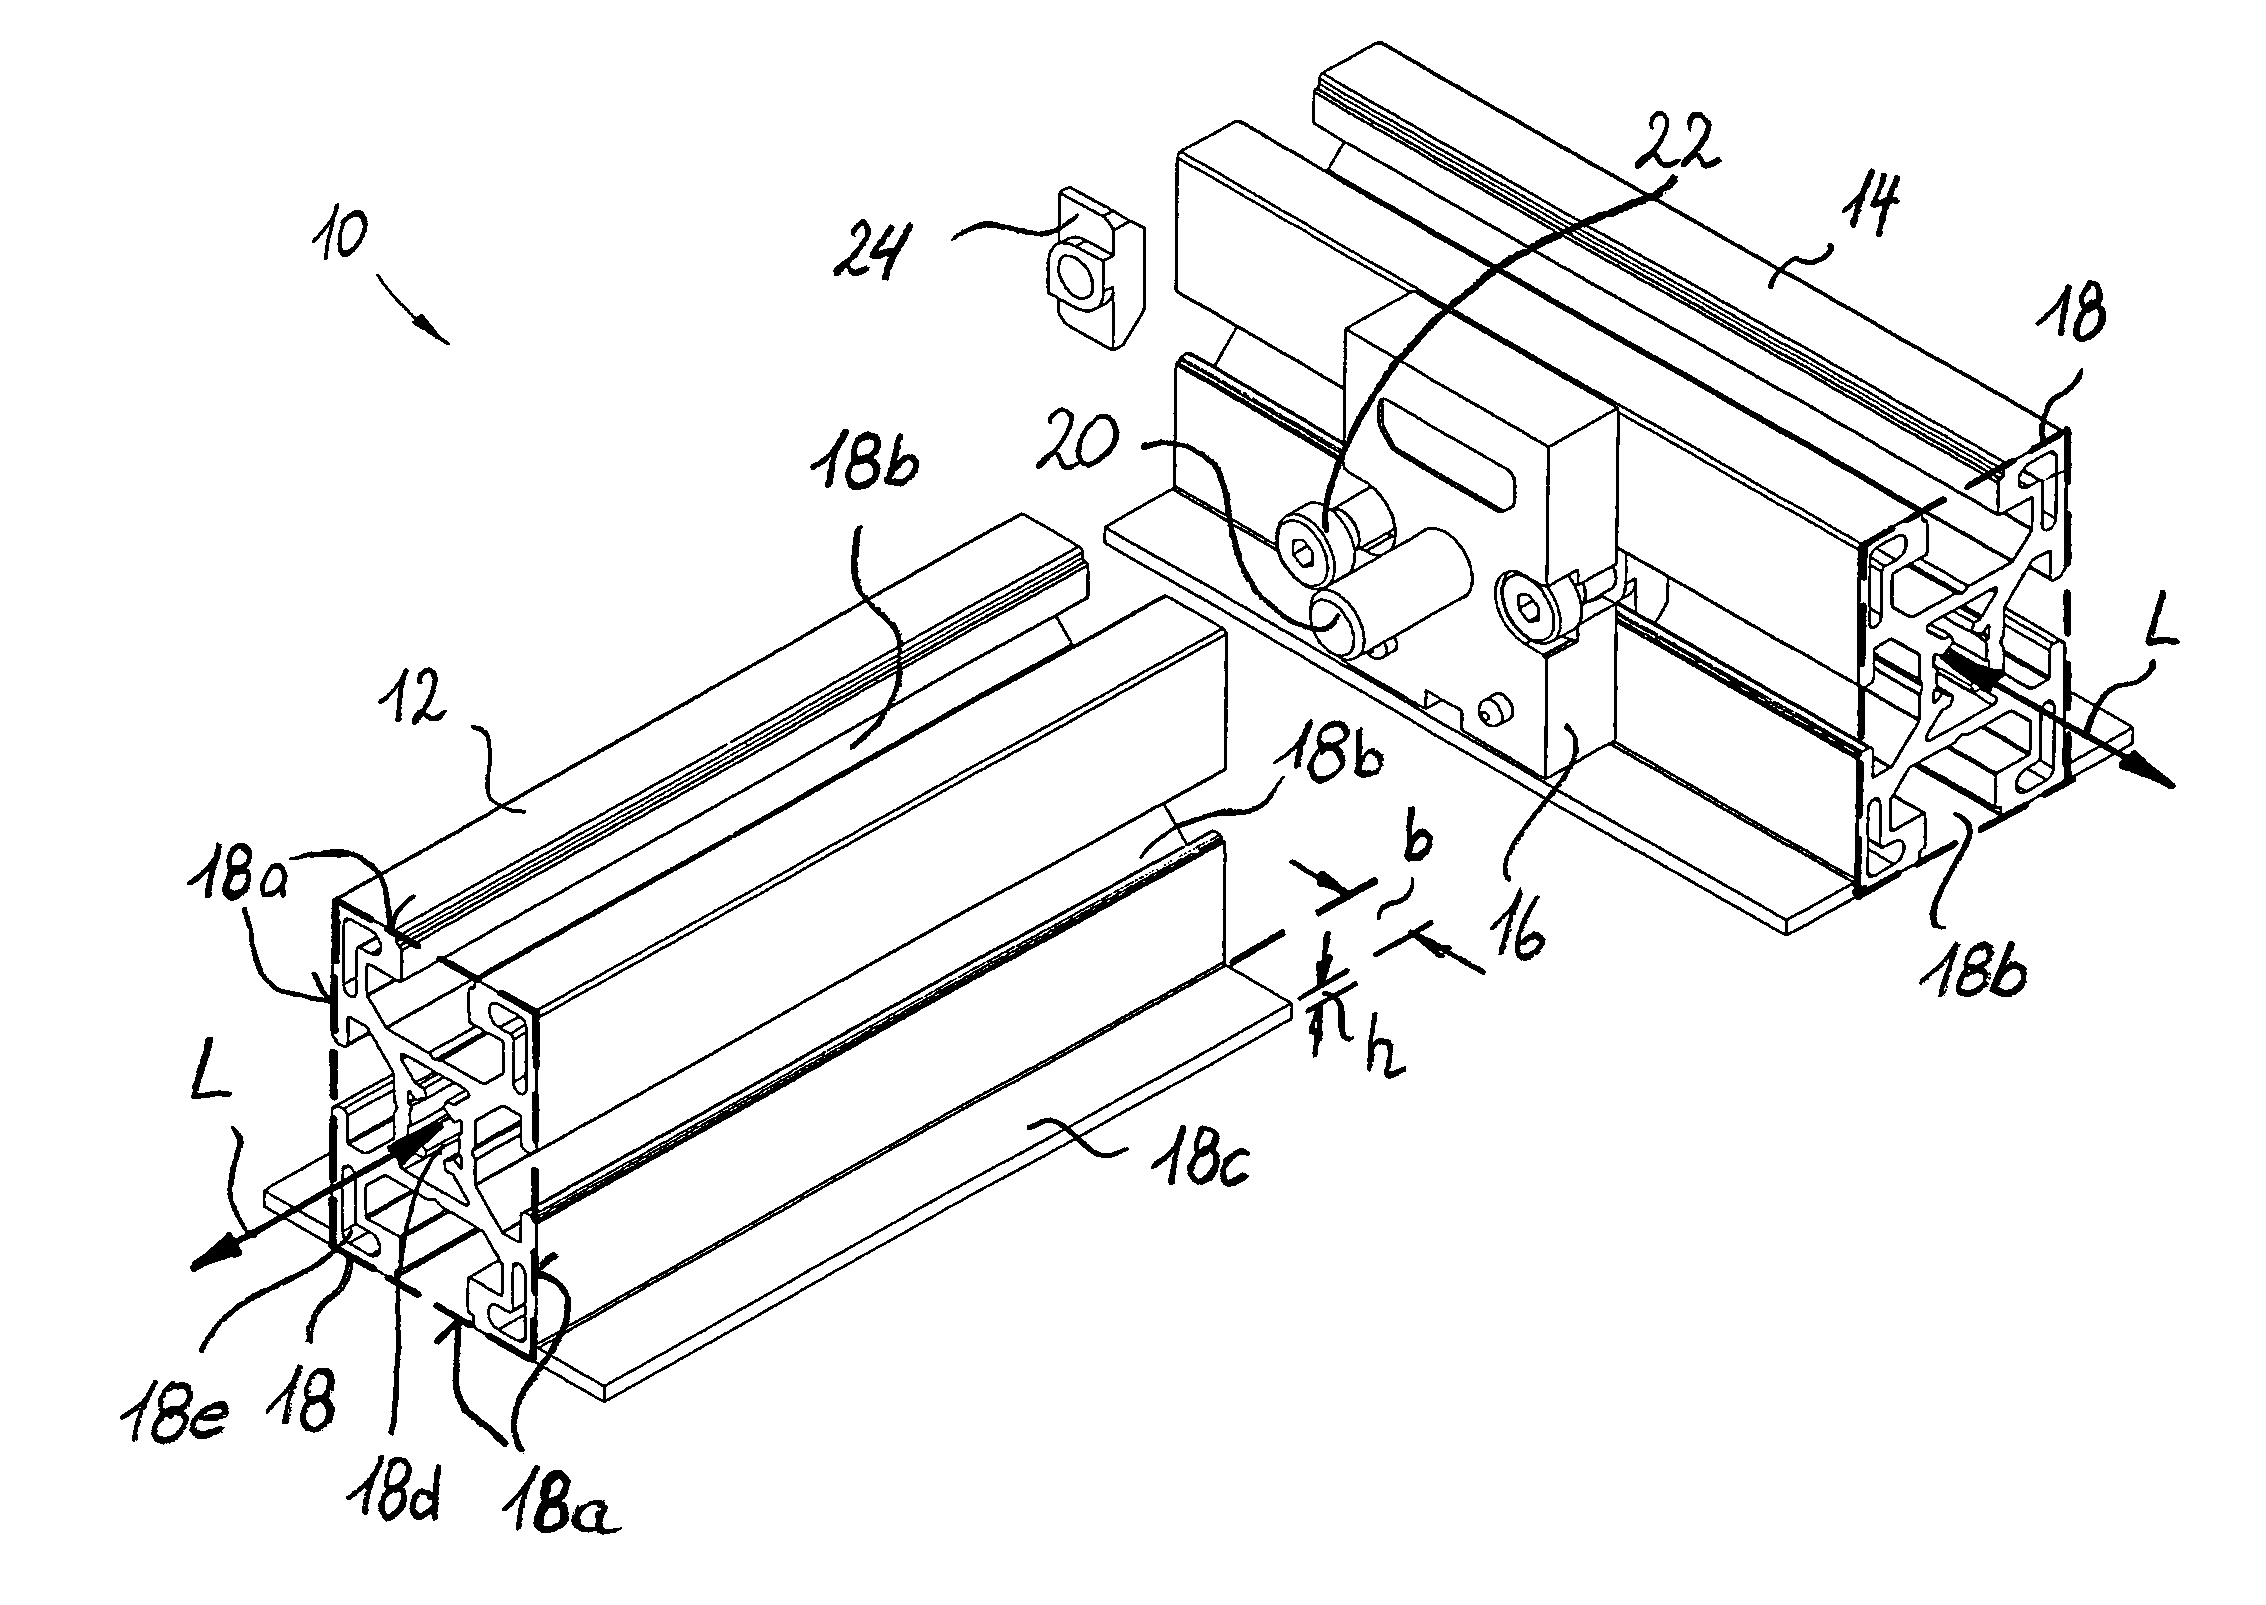 Connection of streamlined-section struts